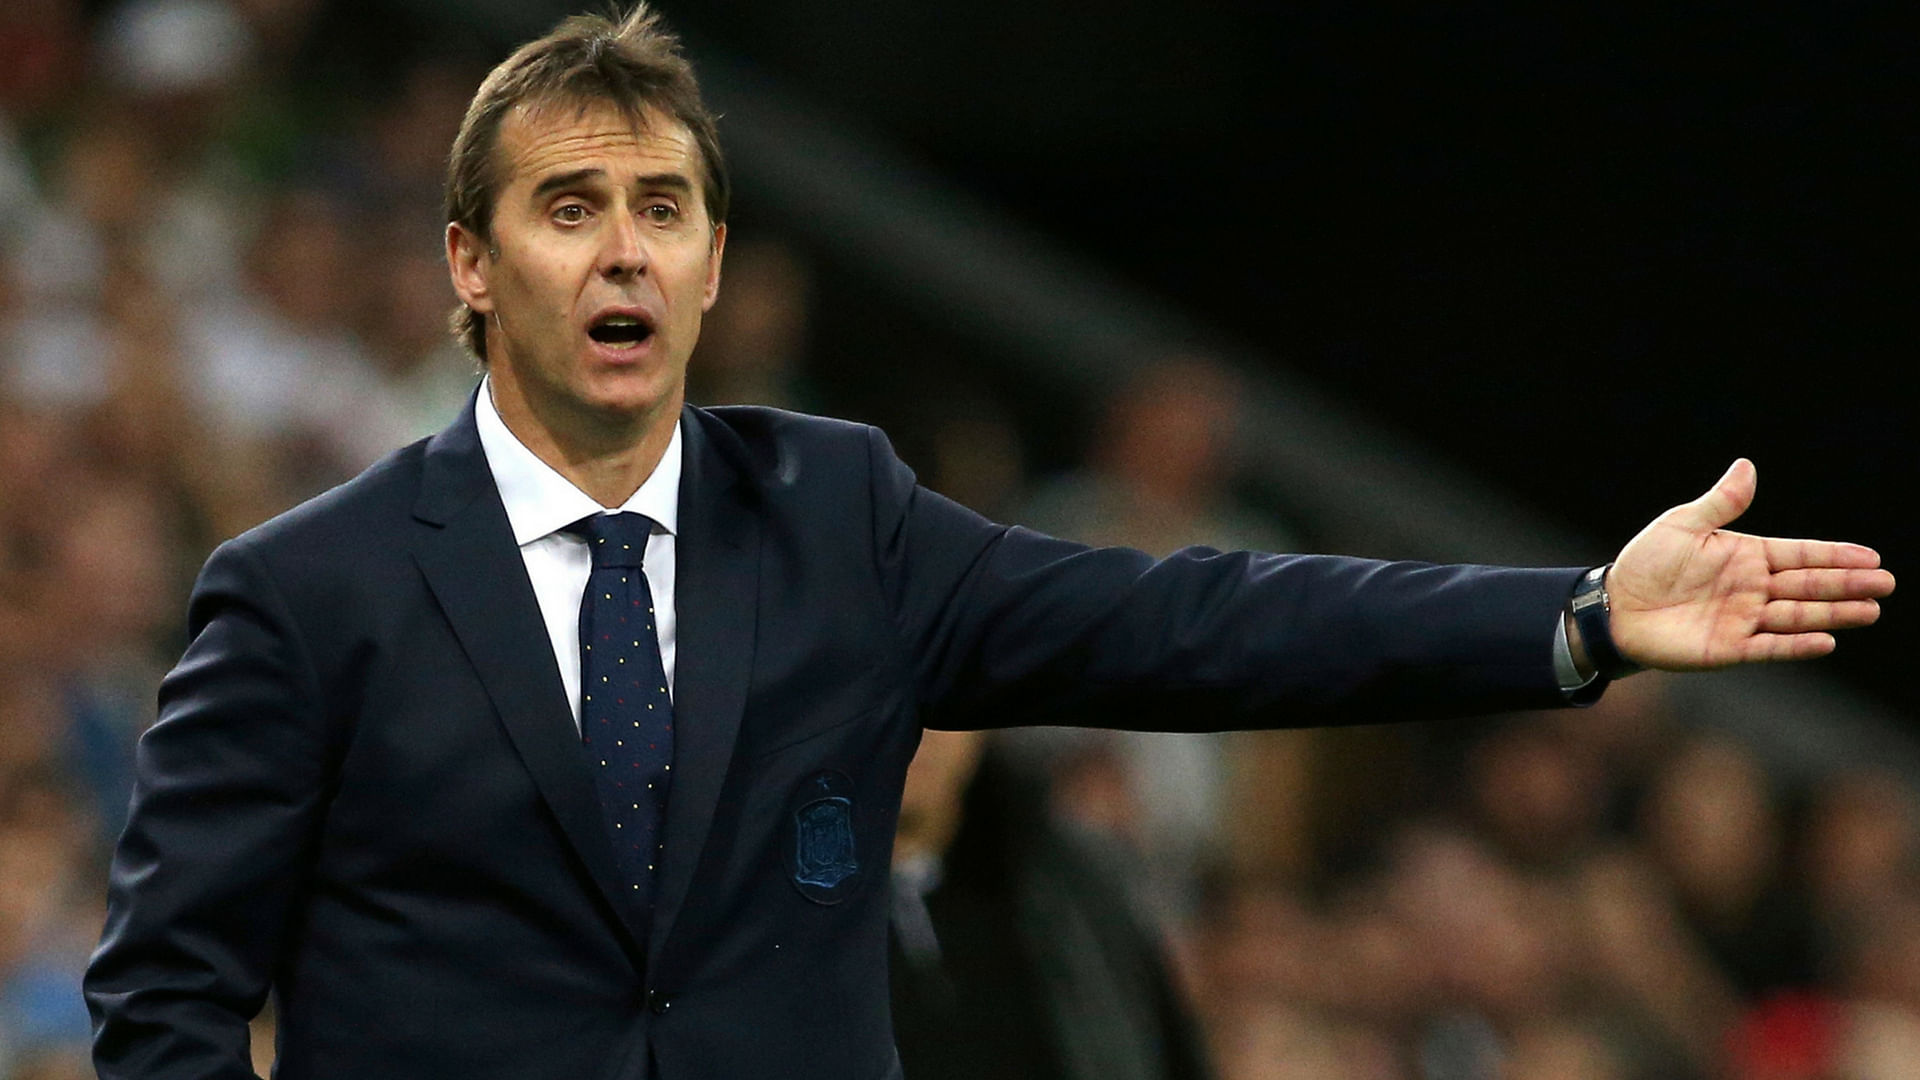 Julen Lopetegui has big shoes to fill in the role of Real Madrid manager. Will he be able to marshal the Spanish team in the meantime?